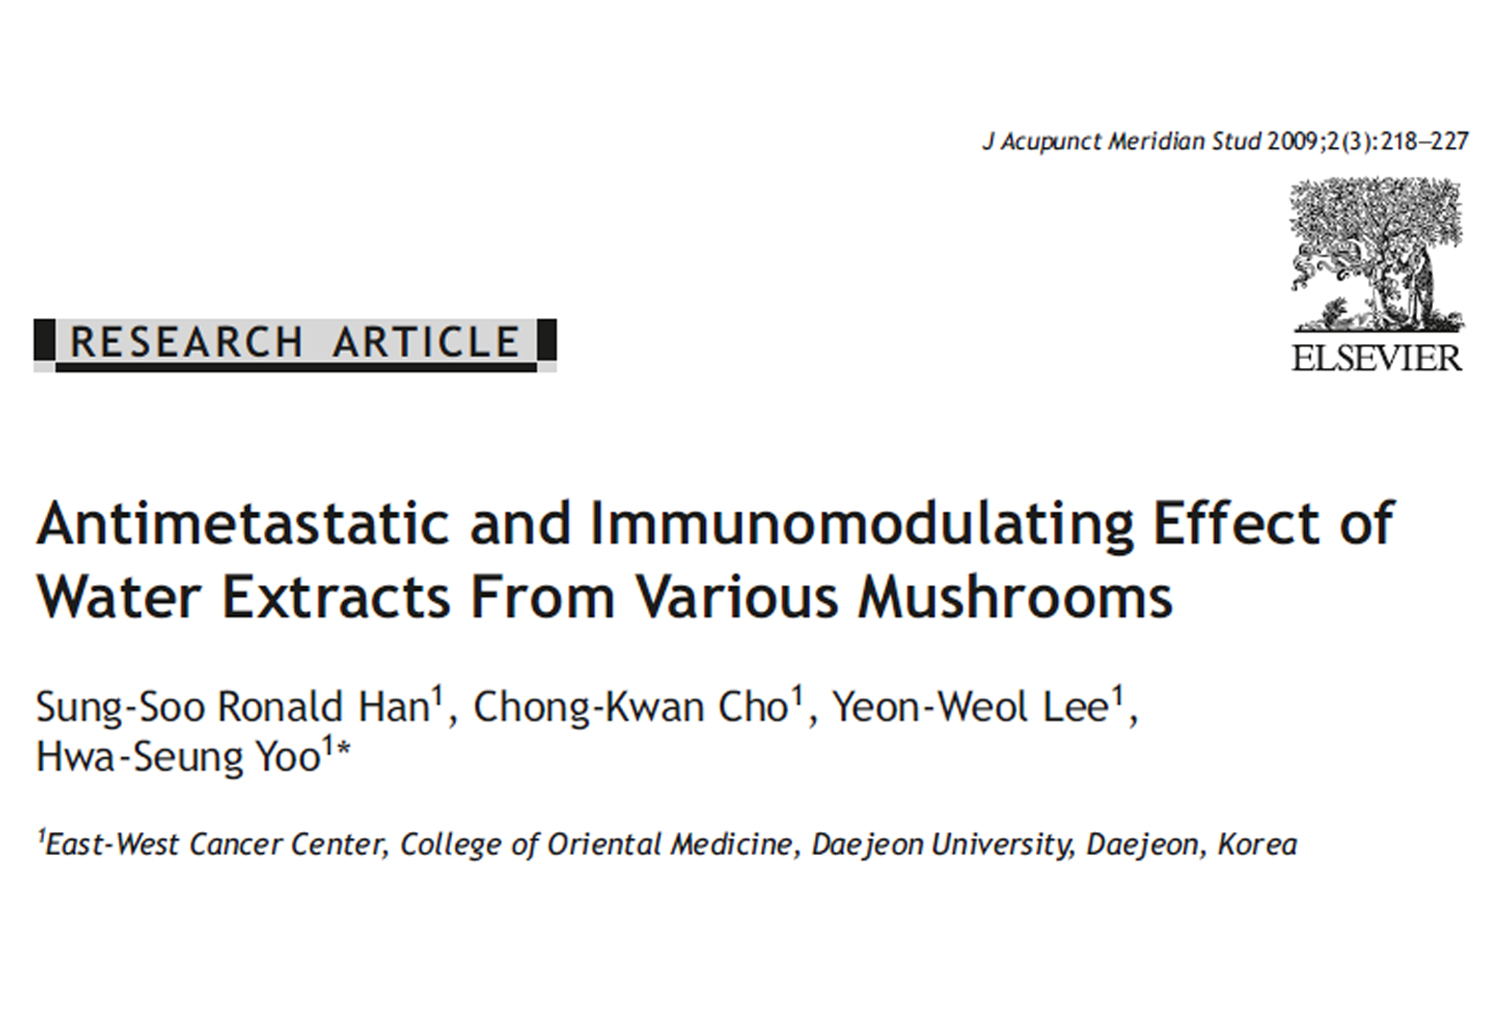 Antimetastatic and immunomodulating effect of water extracts from various mushrooms